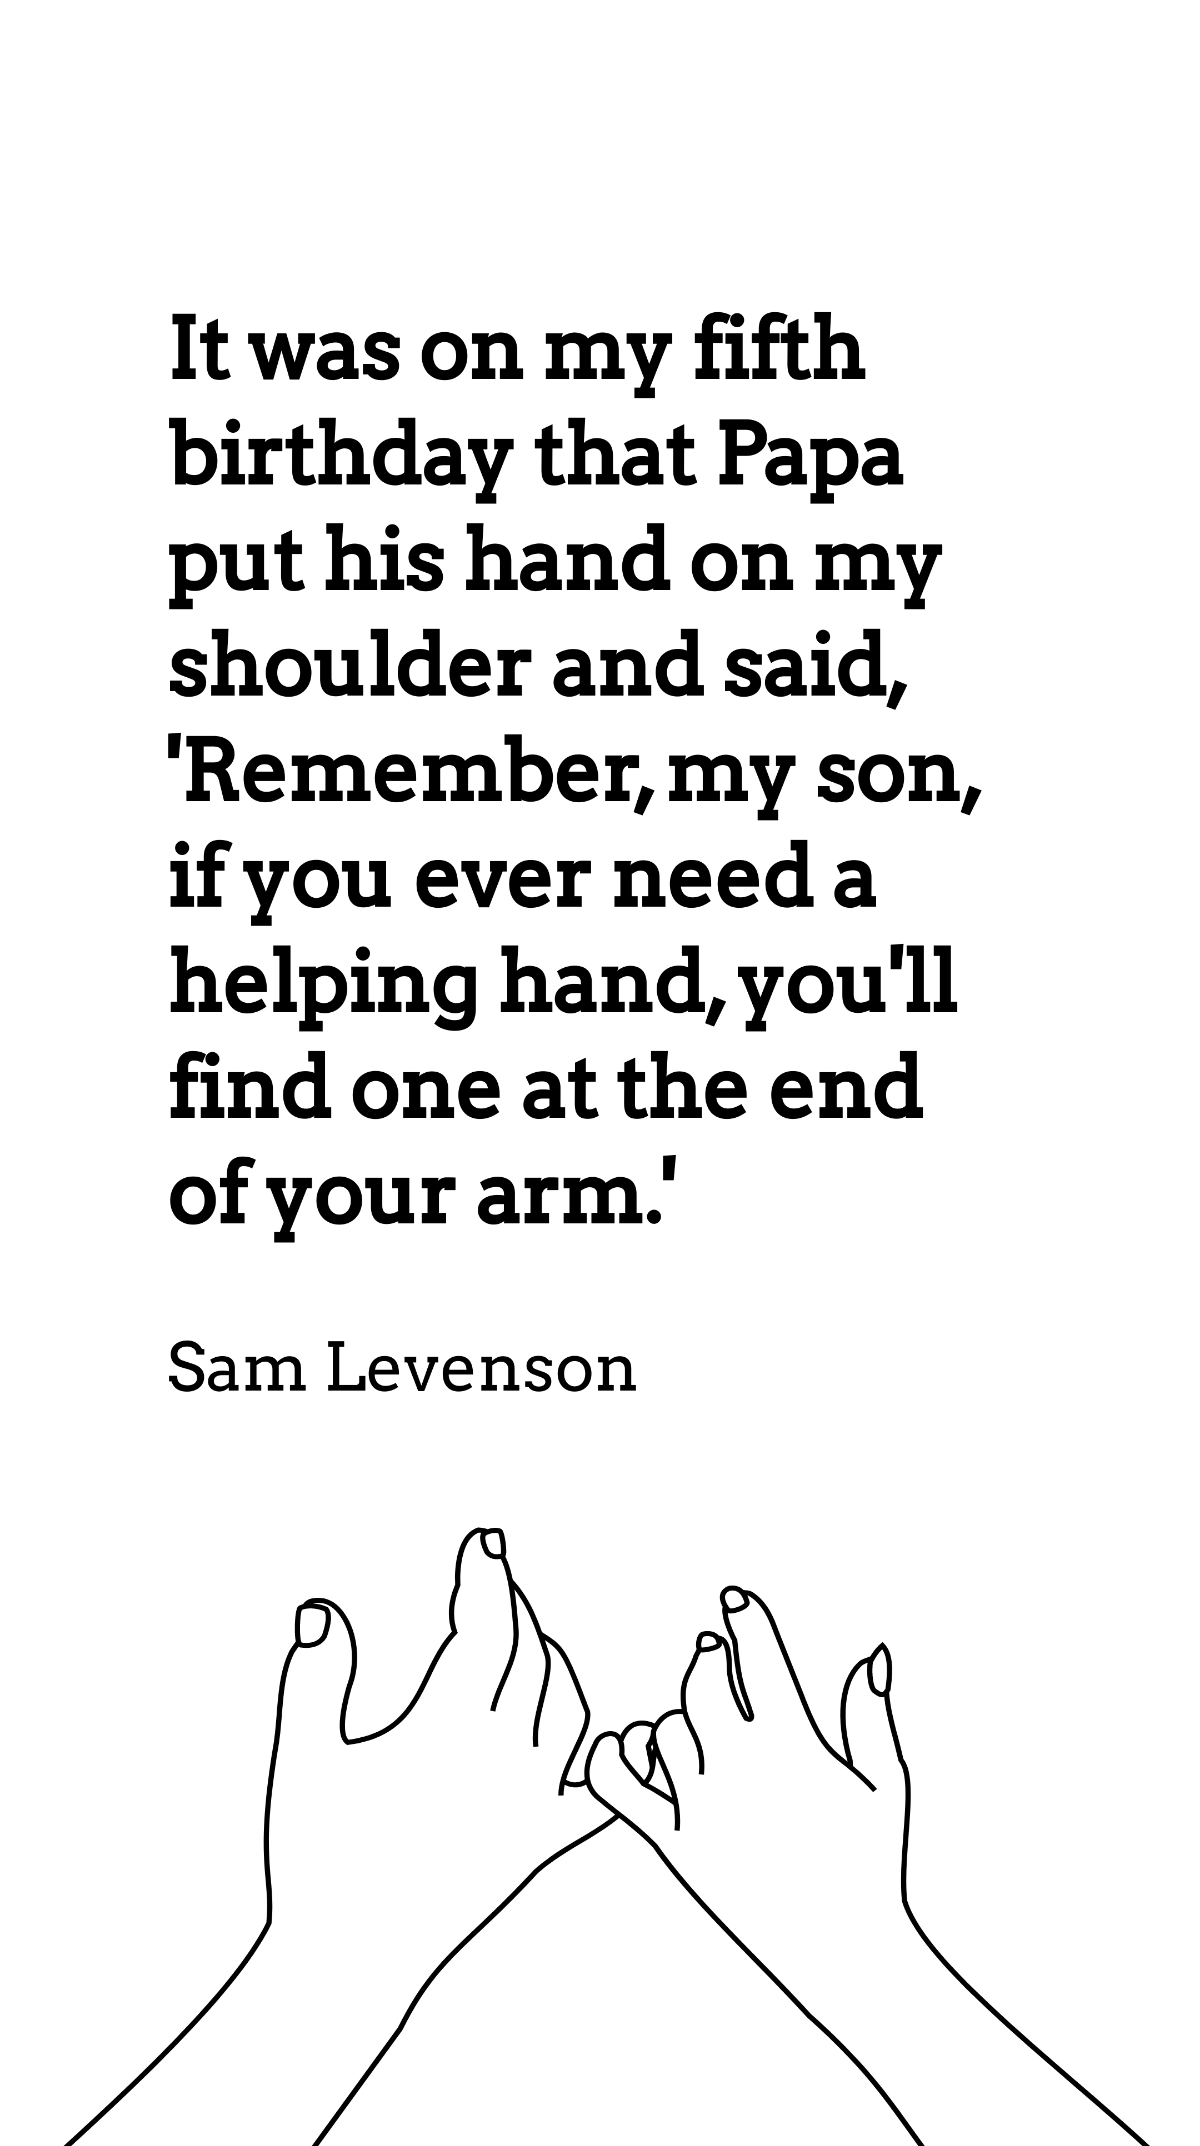 Sam Levenson - It was on my fifth birthday that Papa put his hand on my shoulder and said, 'Remember, my son, if you ever need a helping hand, you'll find one at the end of your arm.' Template